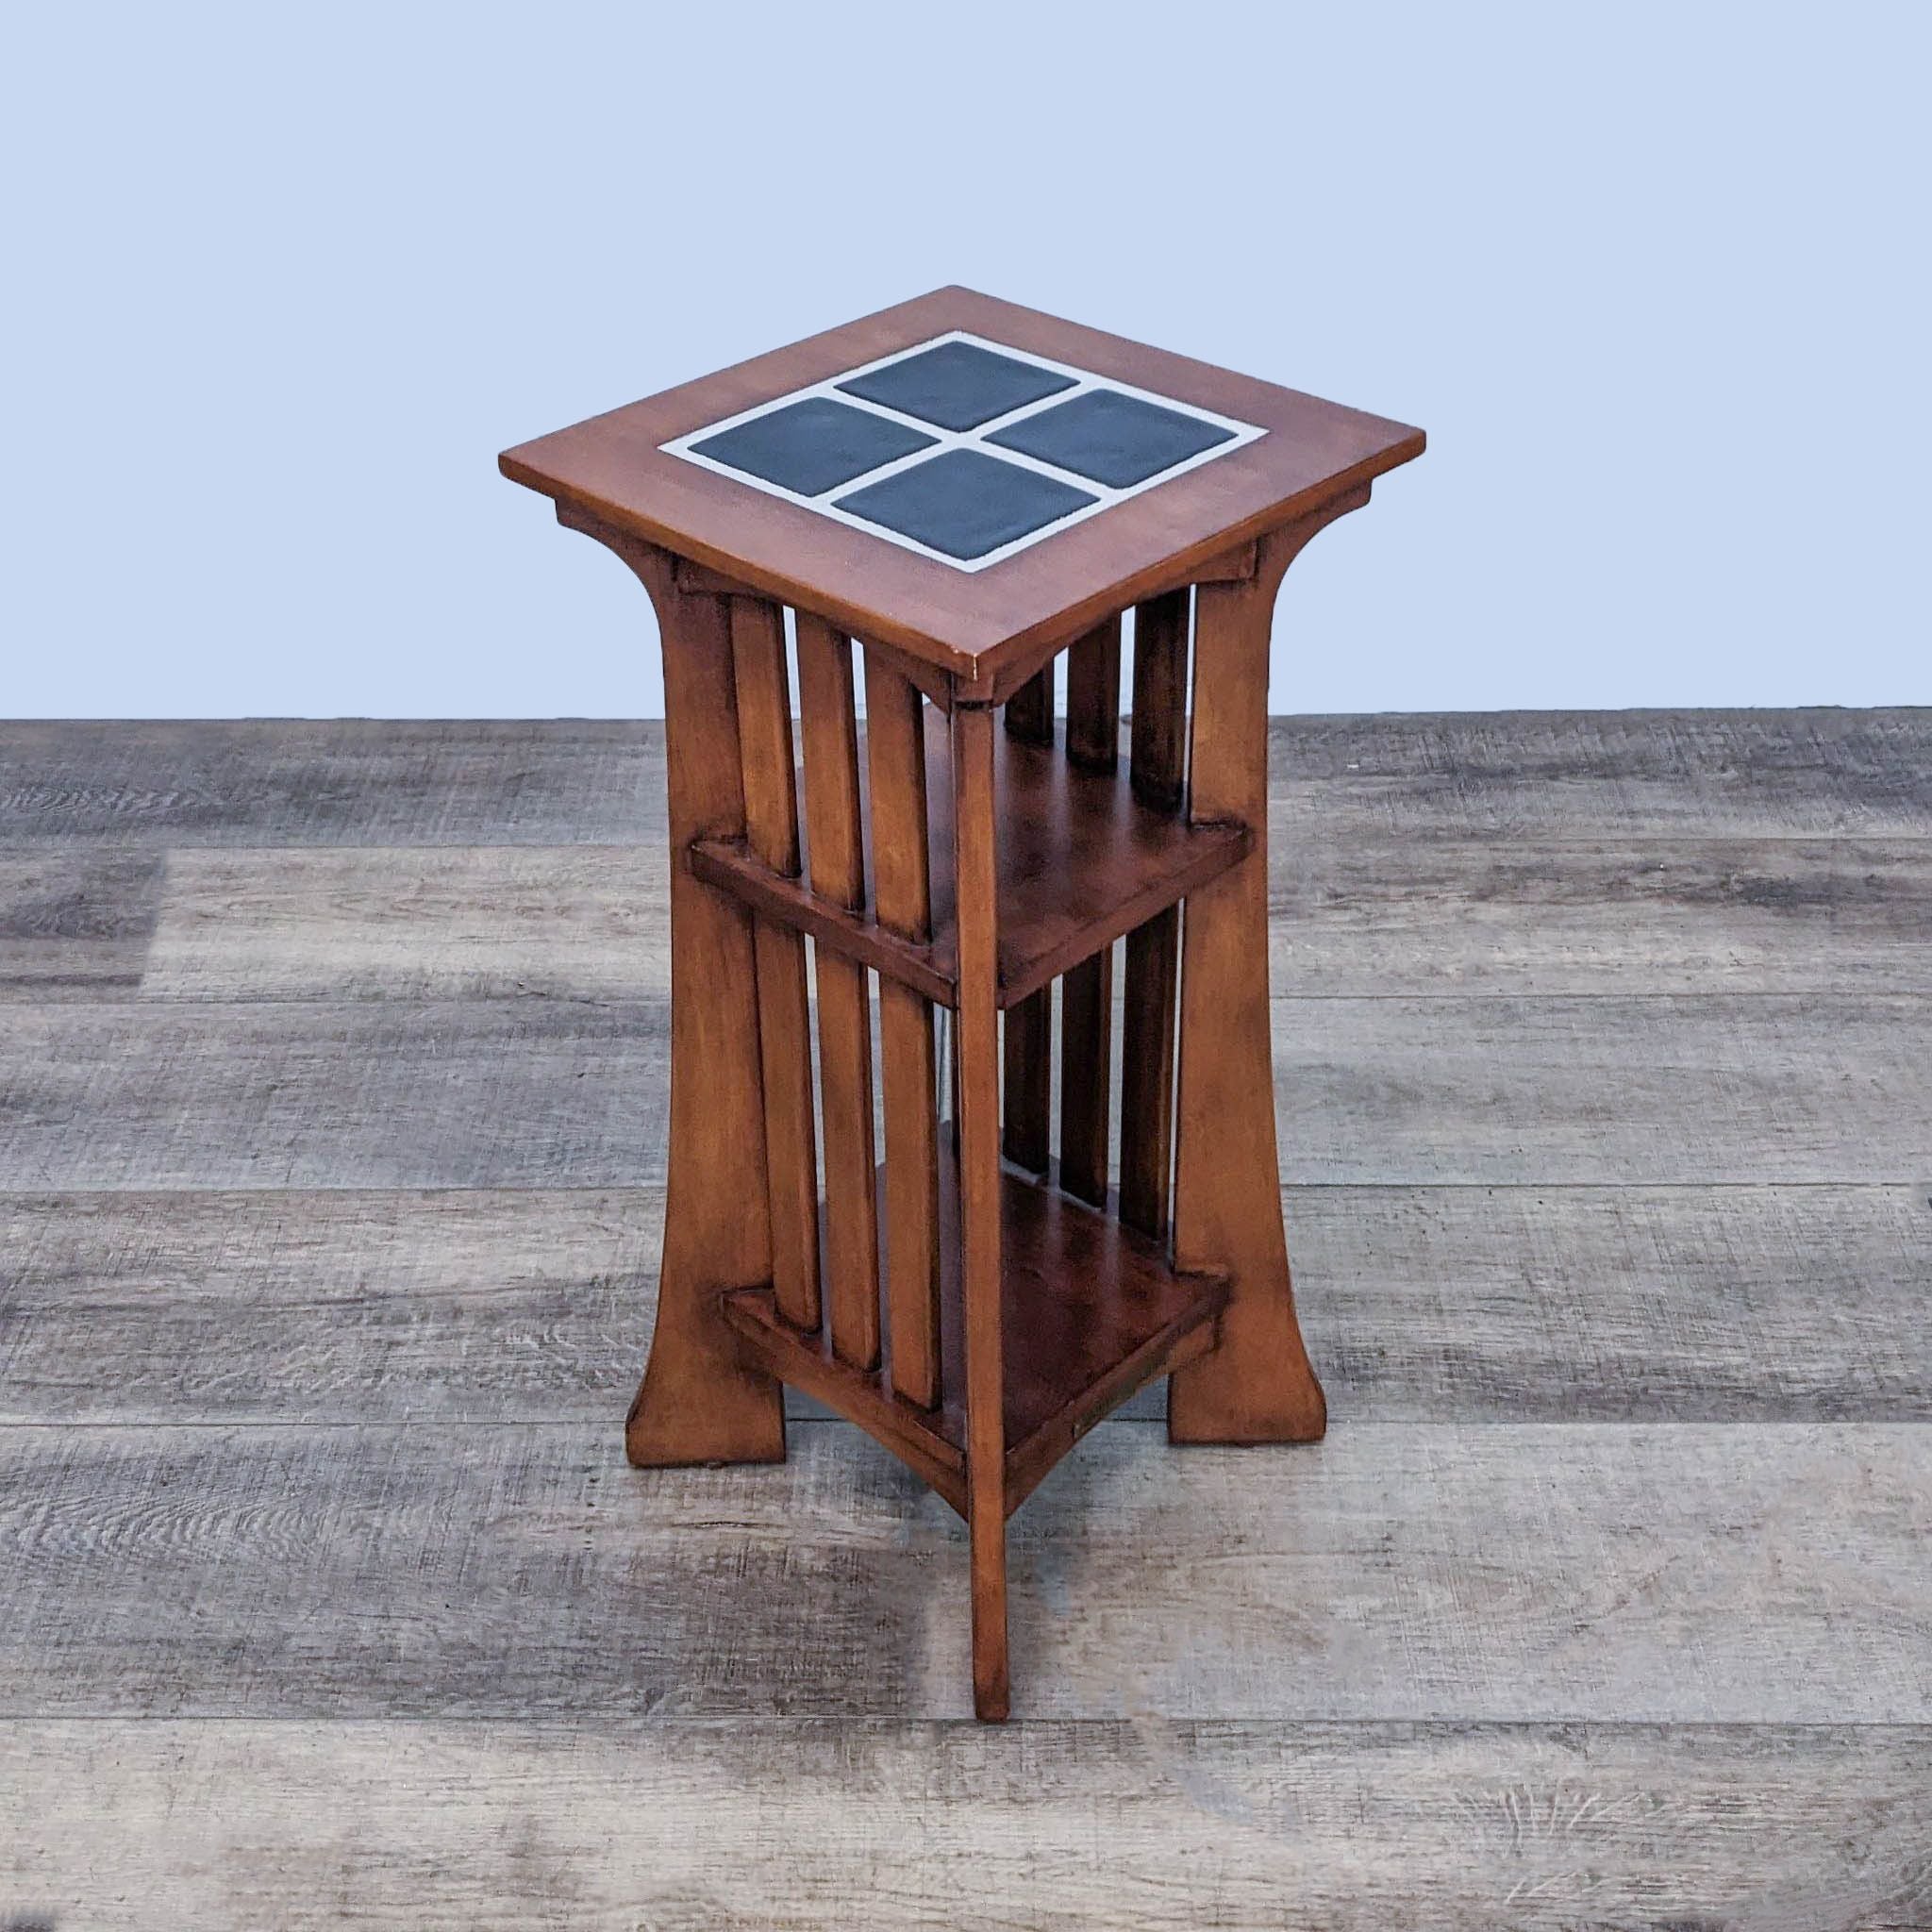 Ethan Allen Mission-style side table with four ceramic tiles on top and vertical slat sides on a wooden floor.